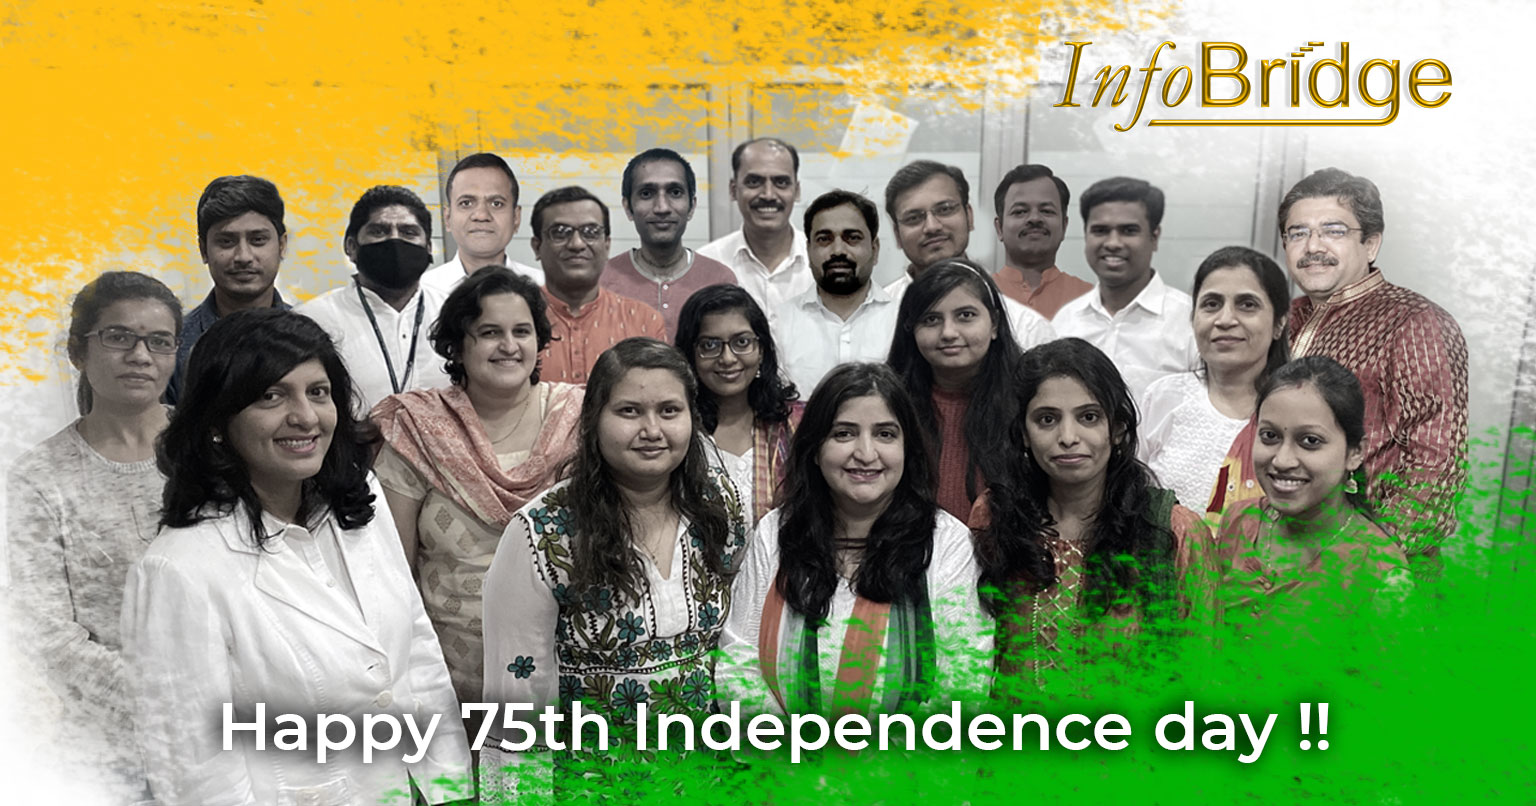 Happy 75th Independence Day to all the citizens of India!